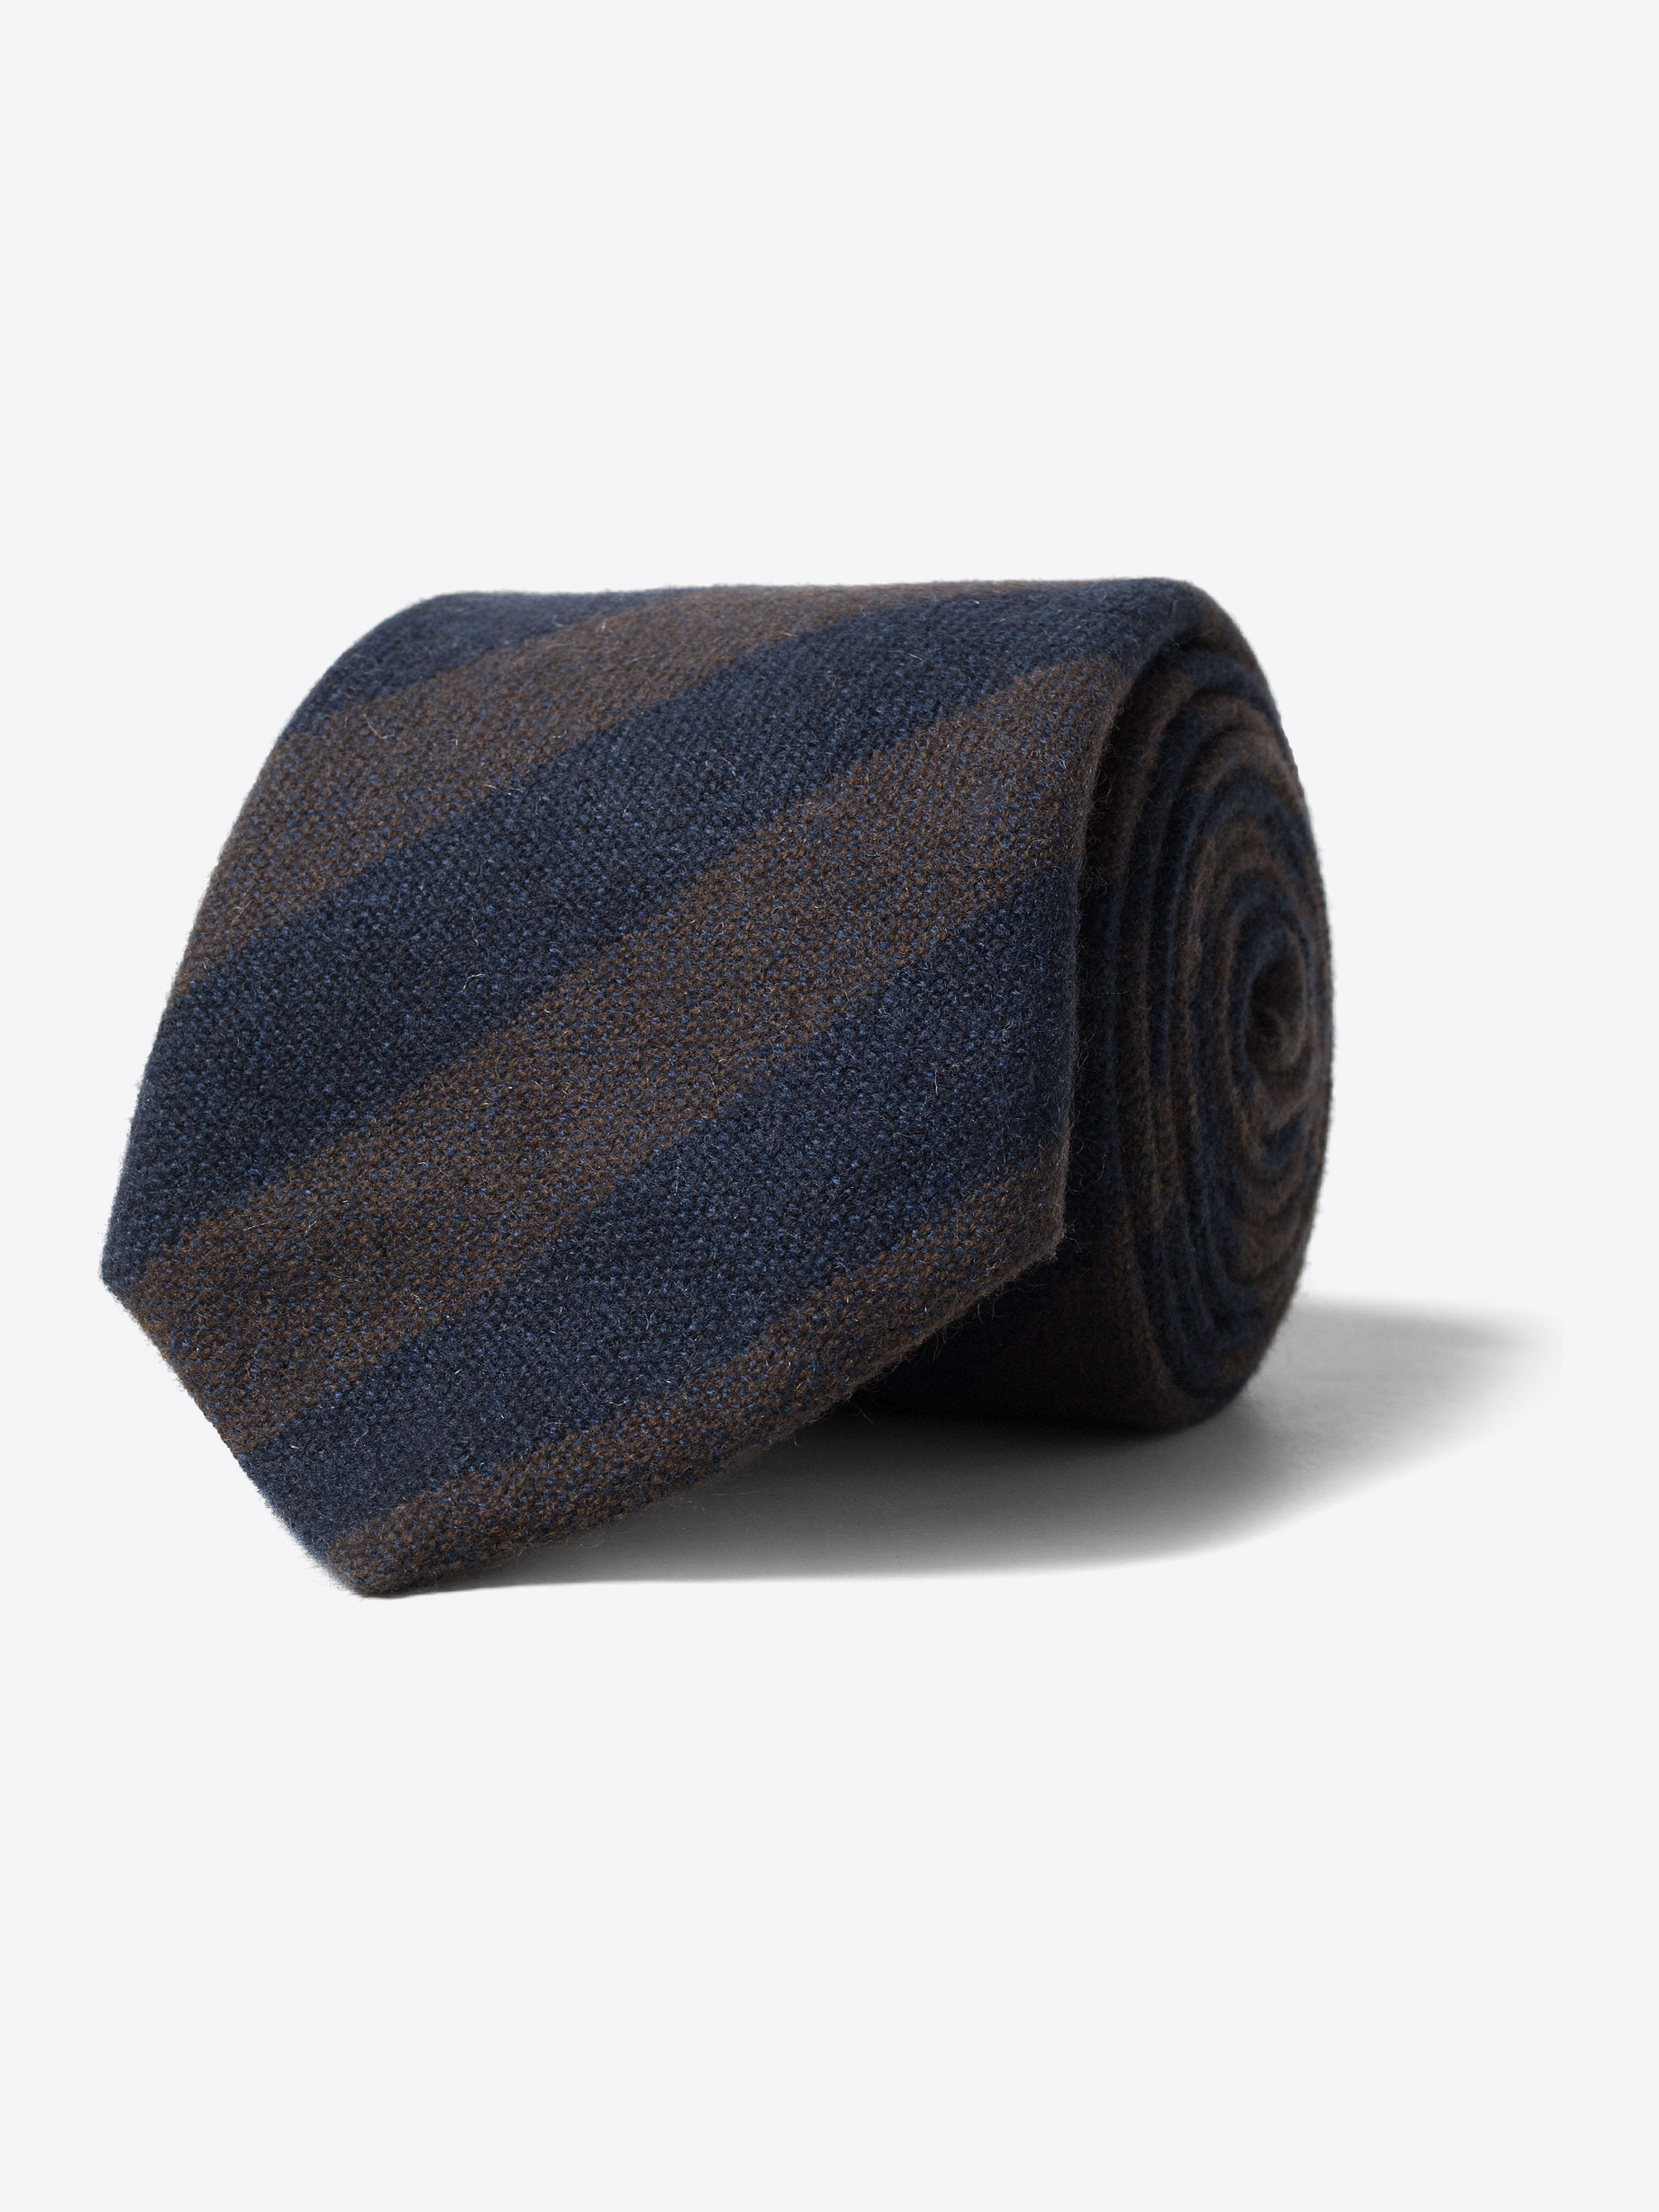 Zoom Image of Mocha and Navy Striped Cashmere Tie